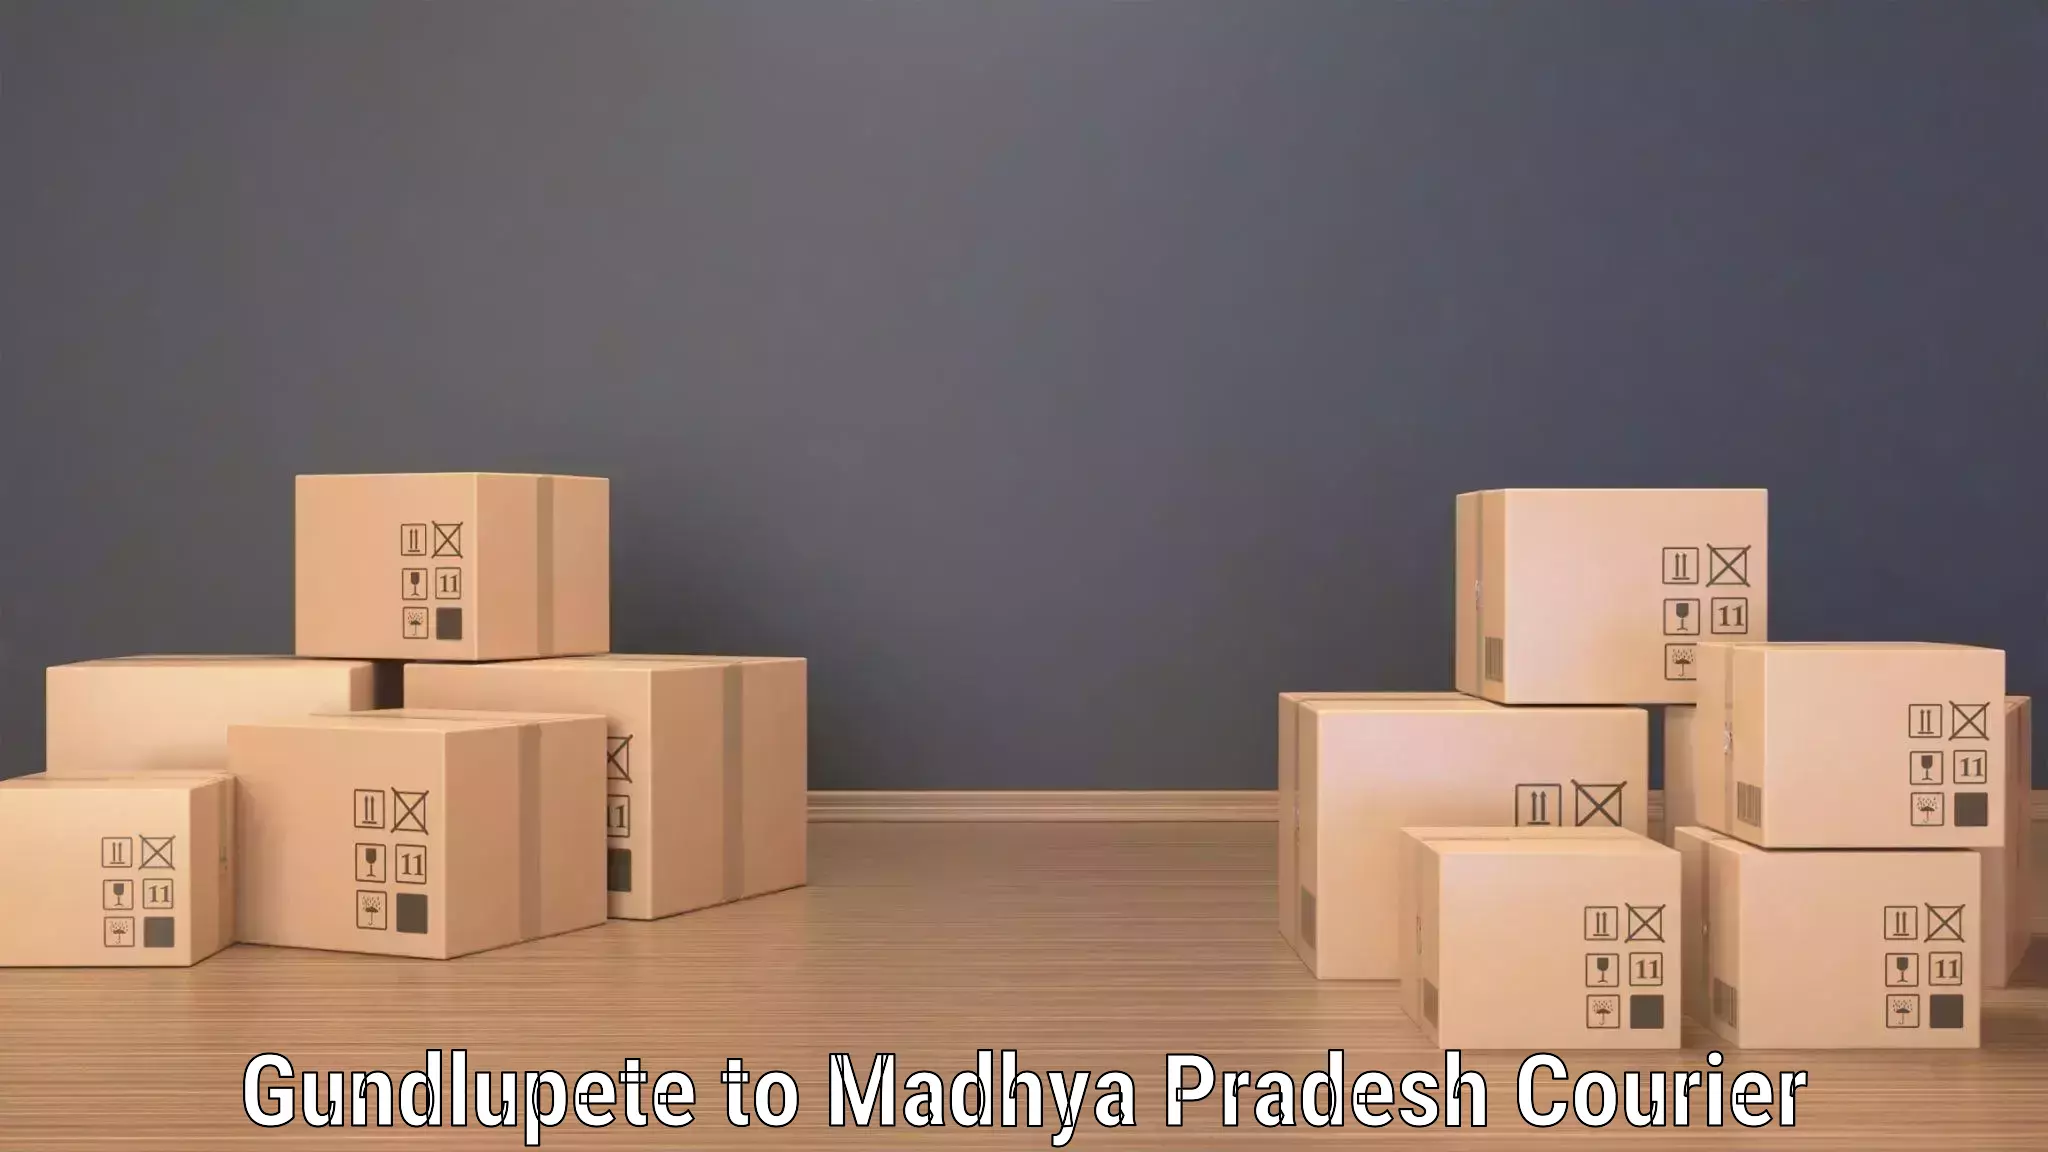 Comprehensive freight services in Gundlupete to Nalkheda